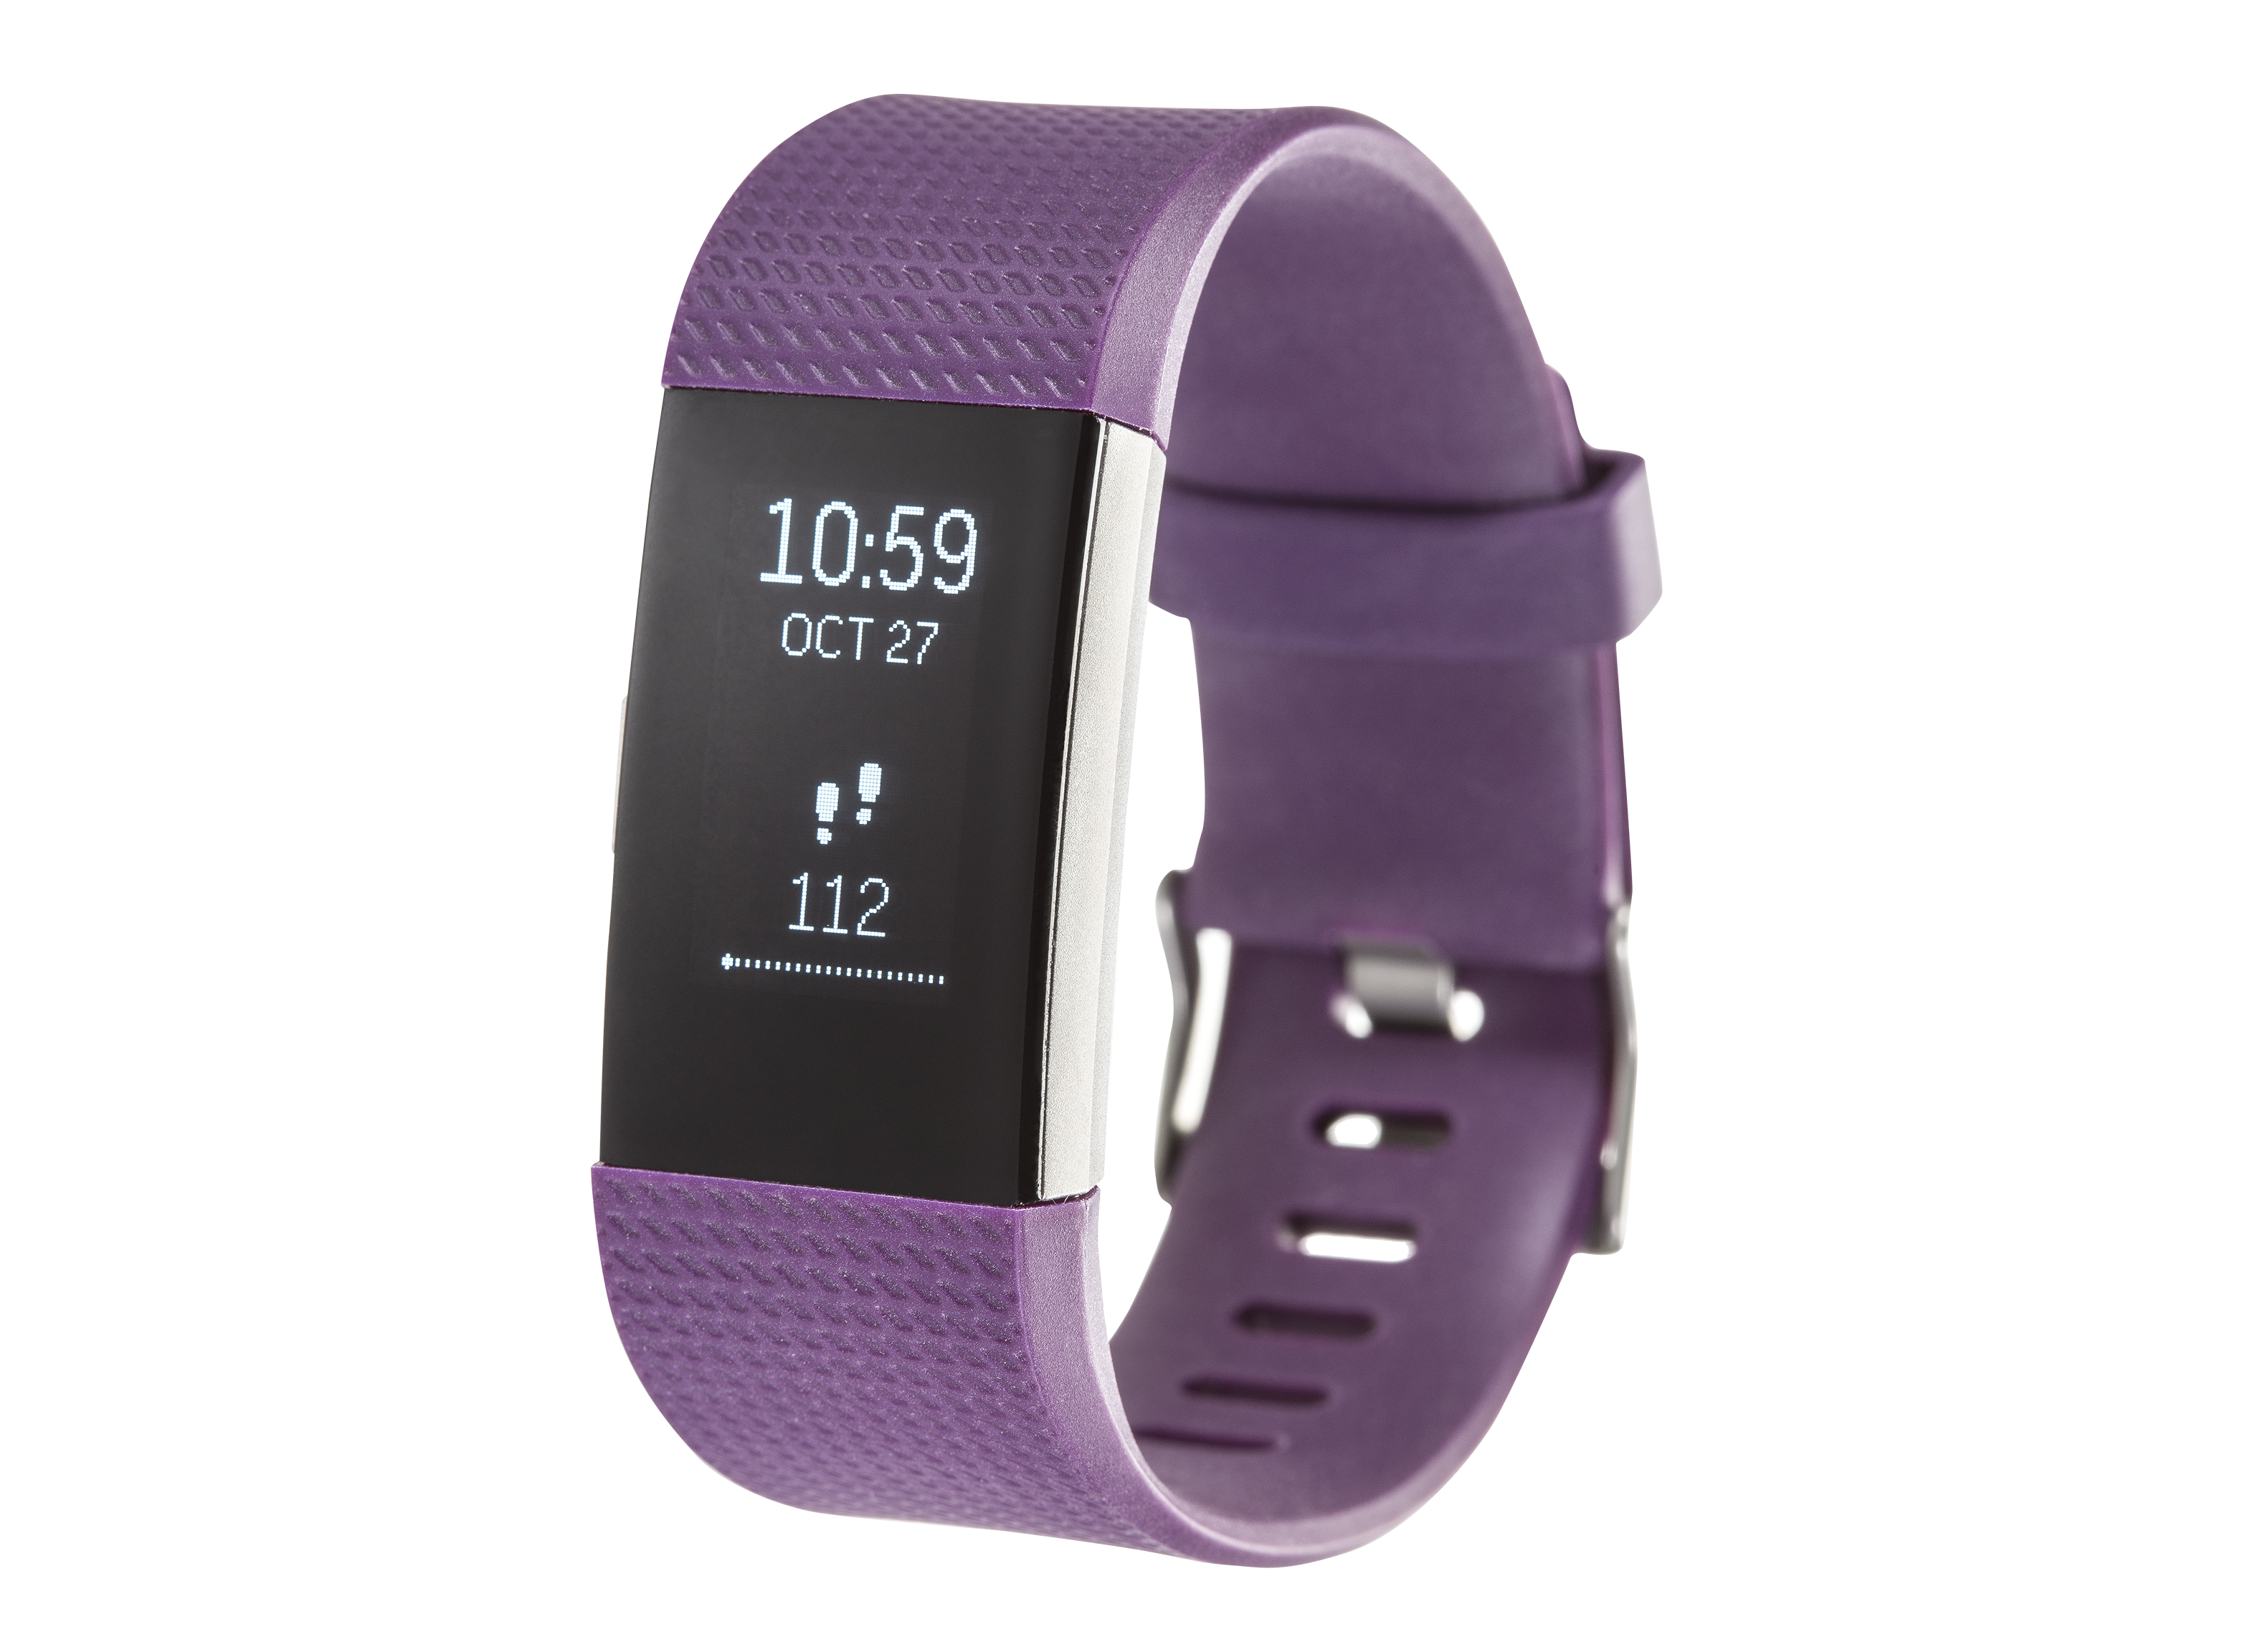 Fitbit Charge 2 Fitness Tracker Review - Consumer Reports